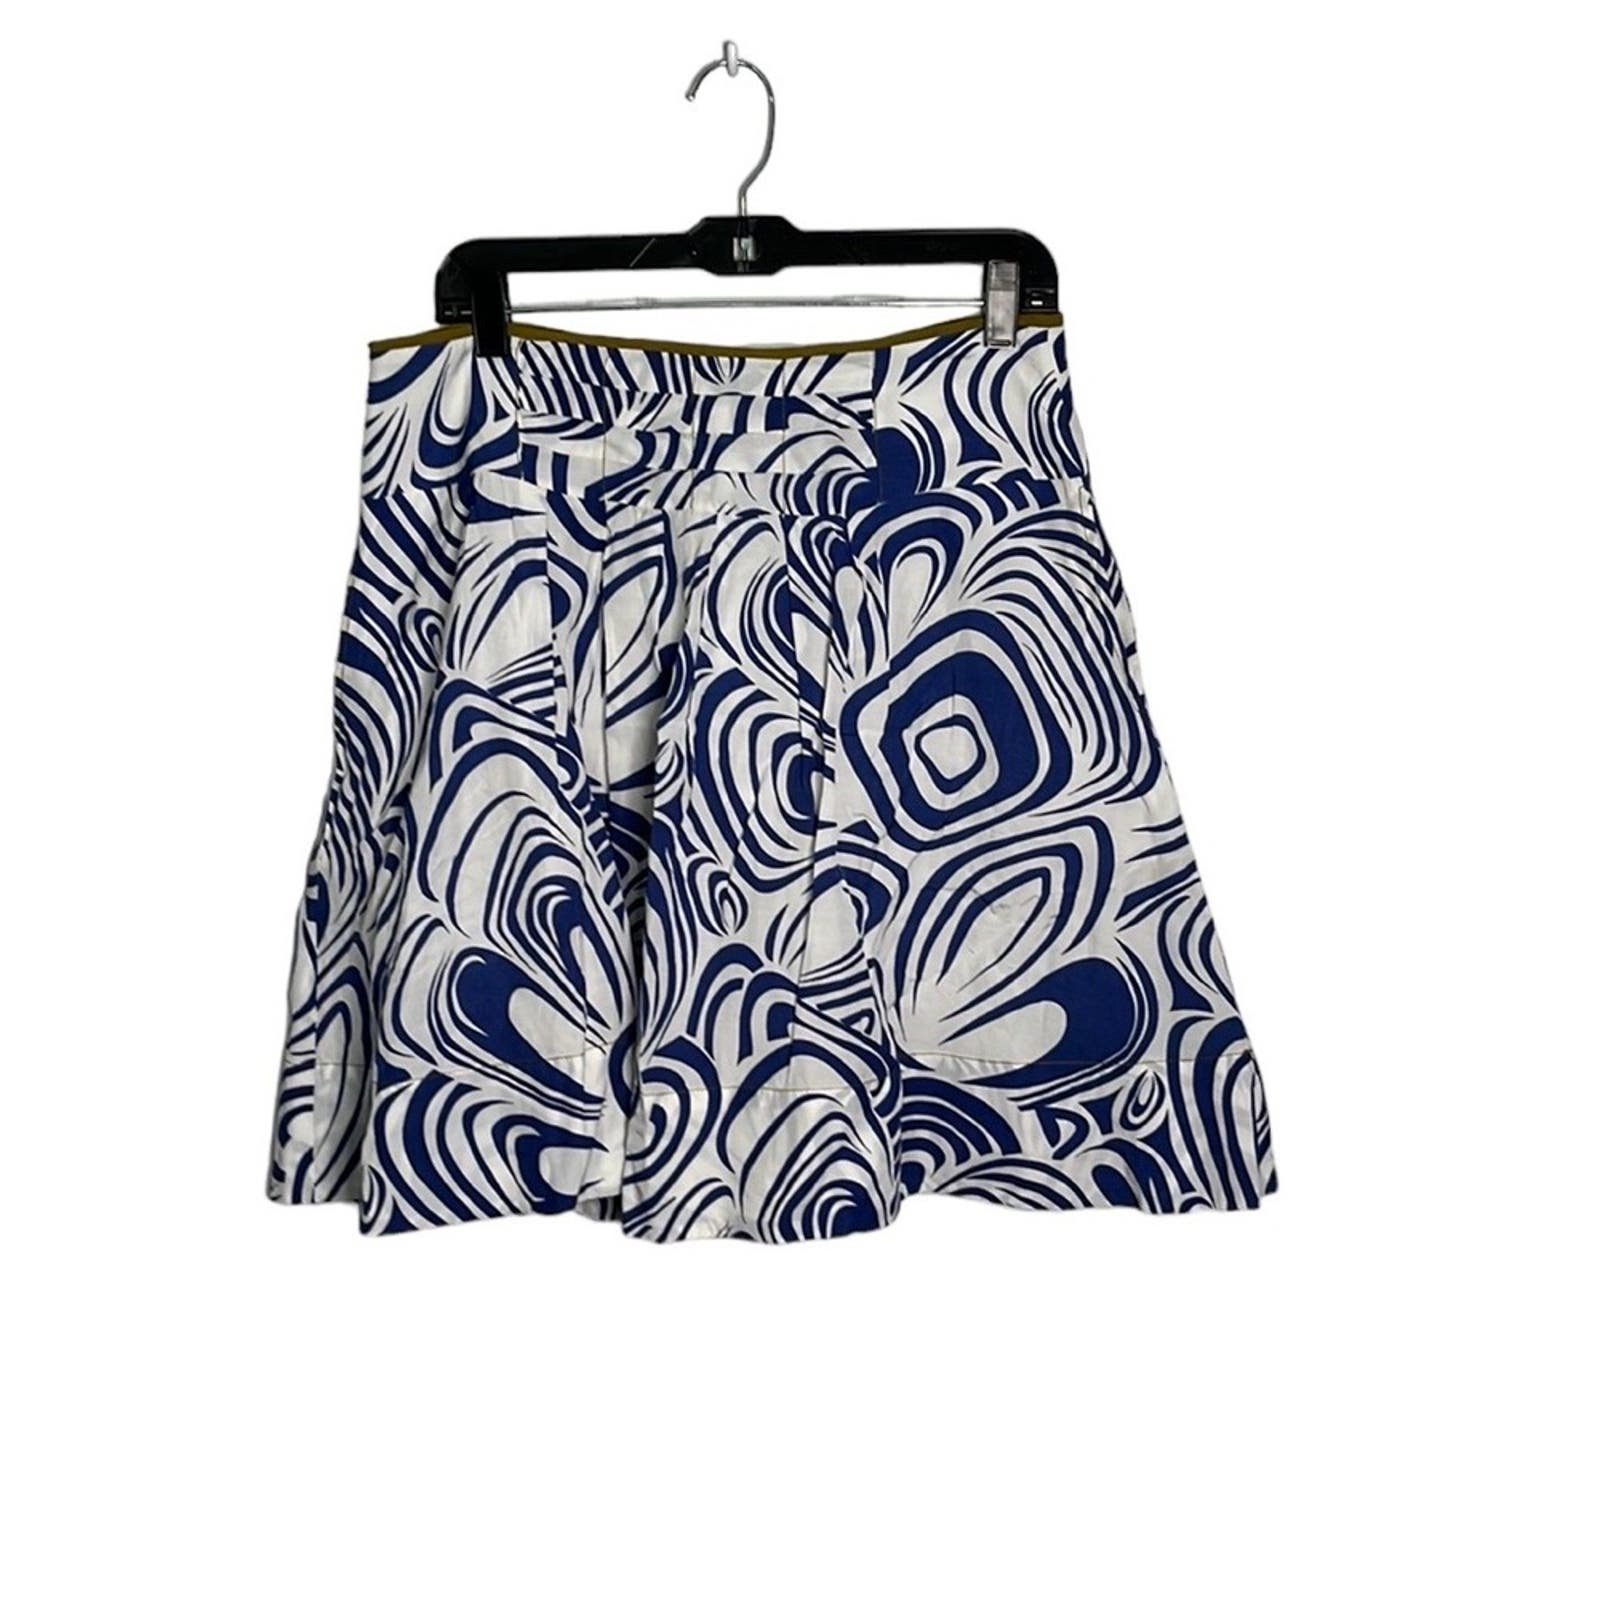 save up to 70% Cabi Blue and White Swirl Print Pleated 